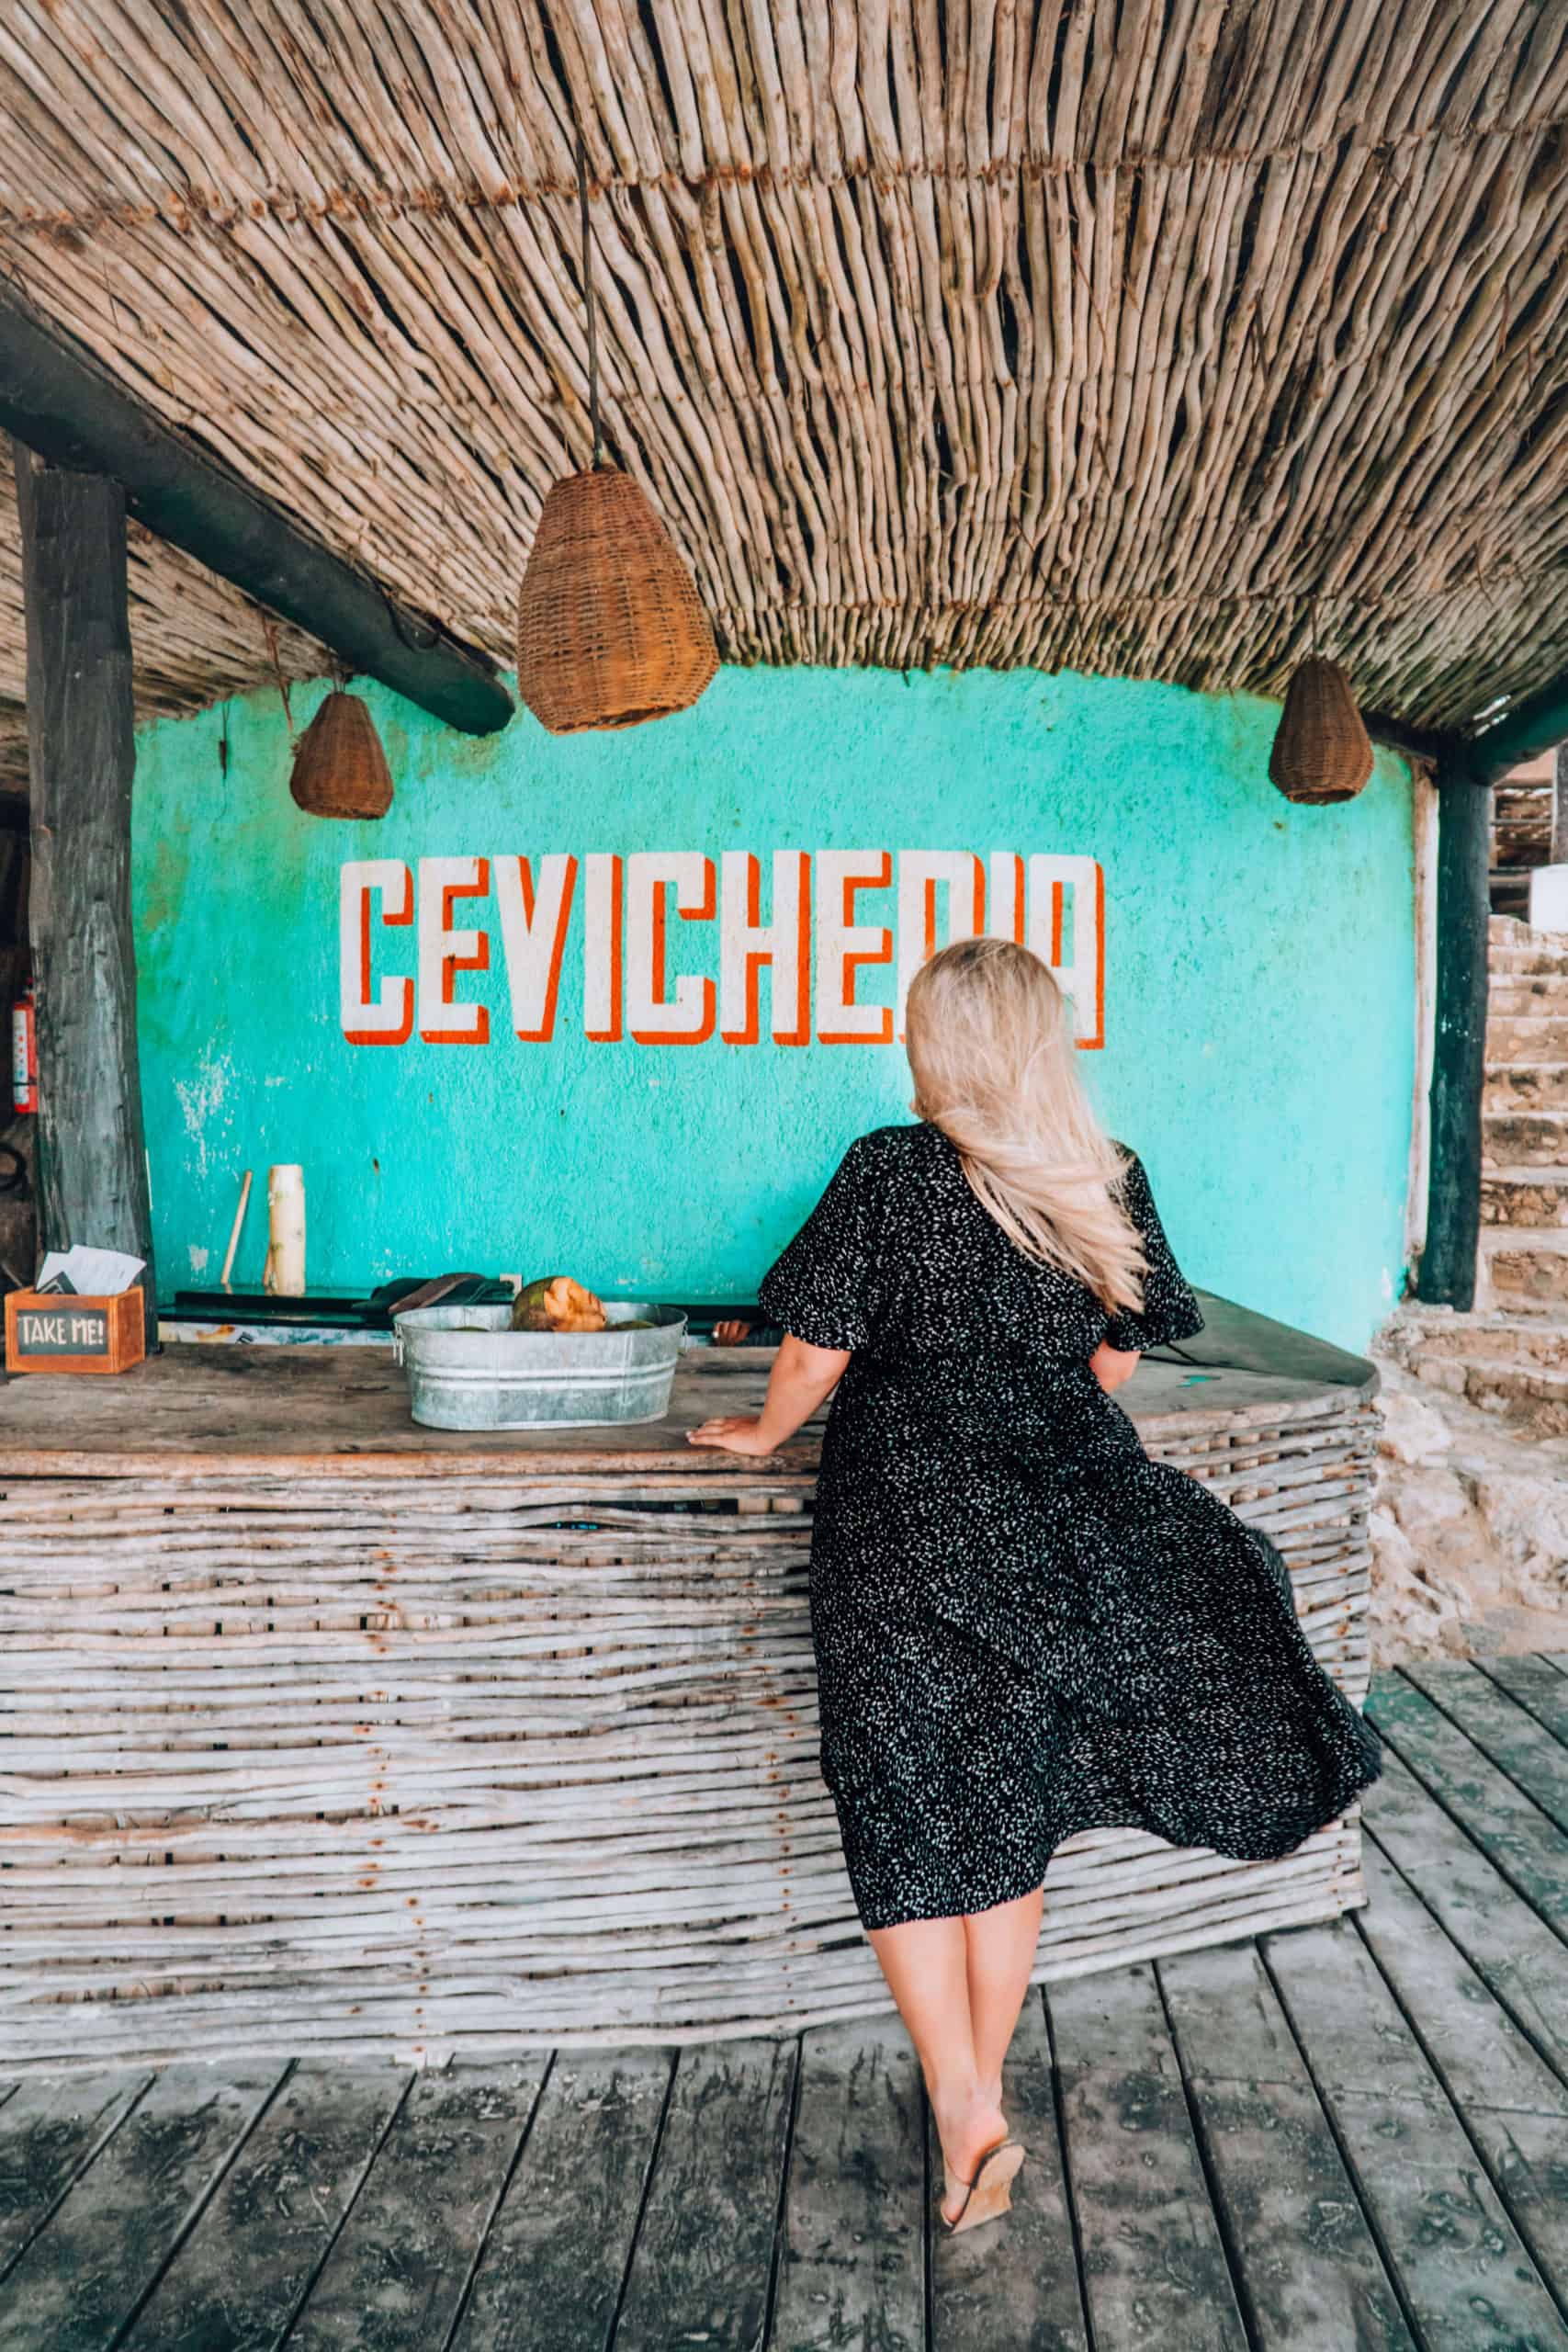 Ordering ceviche at the Cevicheria at Playa Papaya Project in Tulum